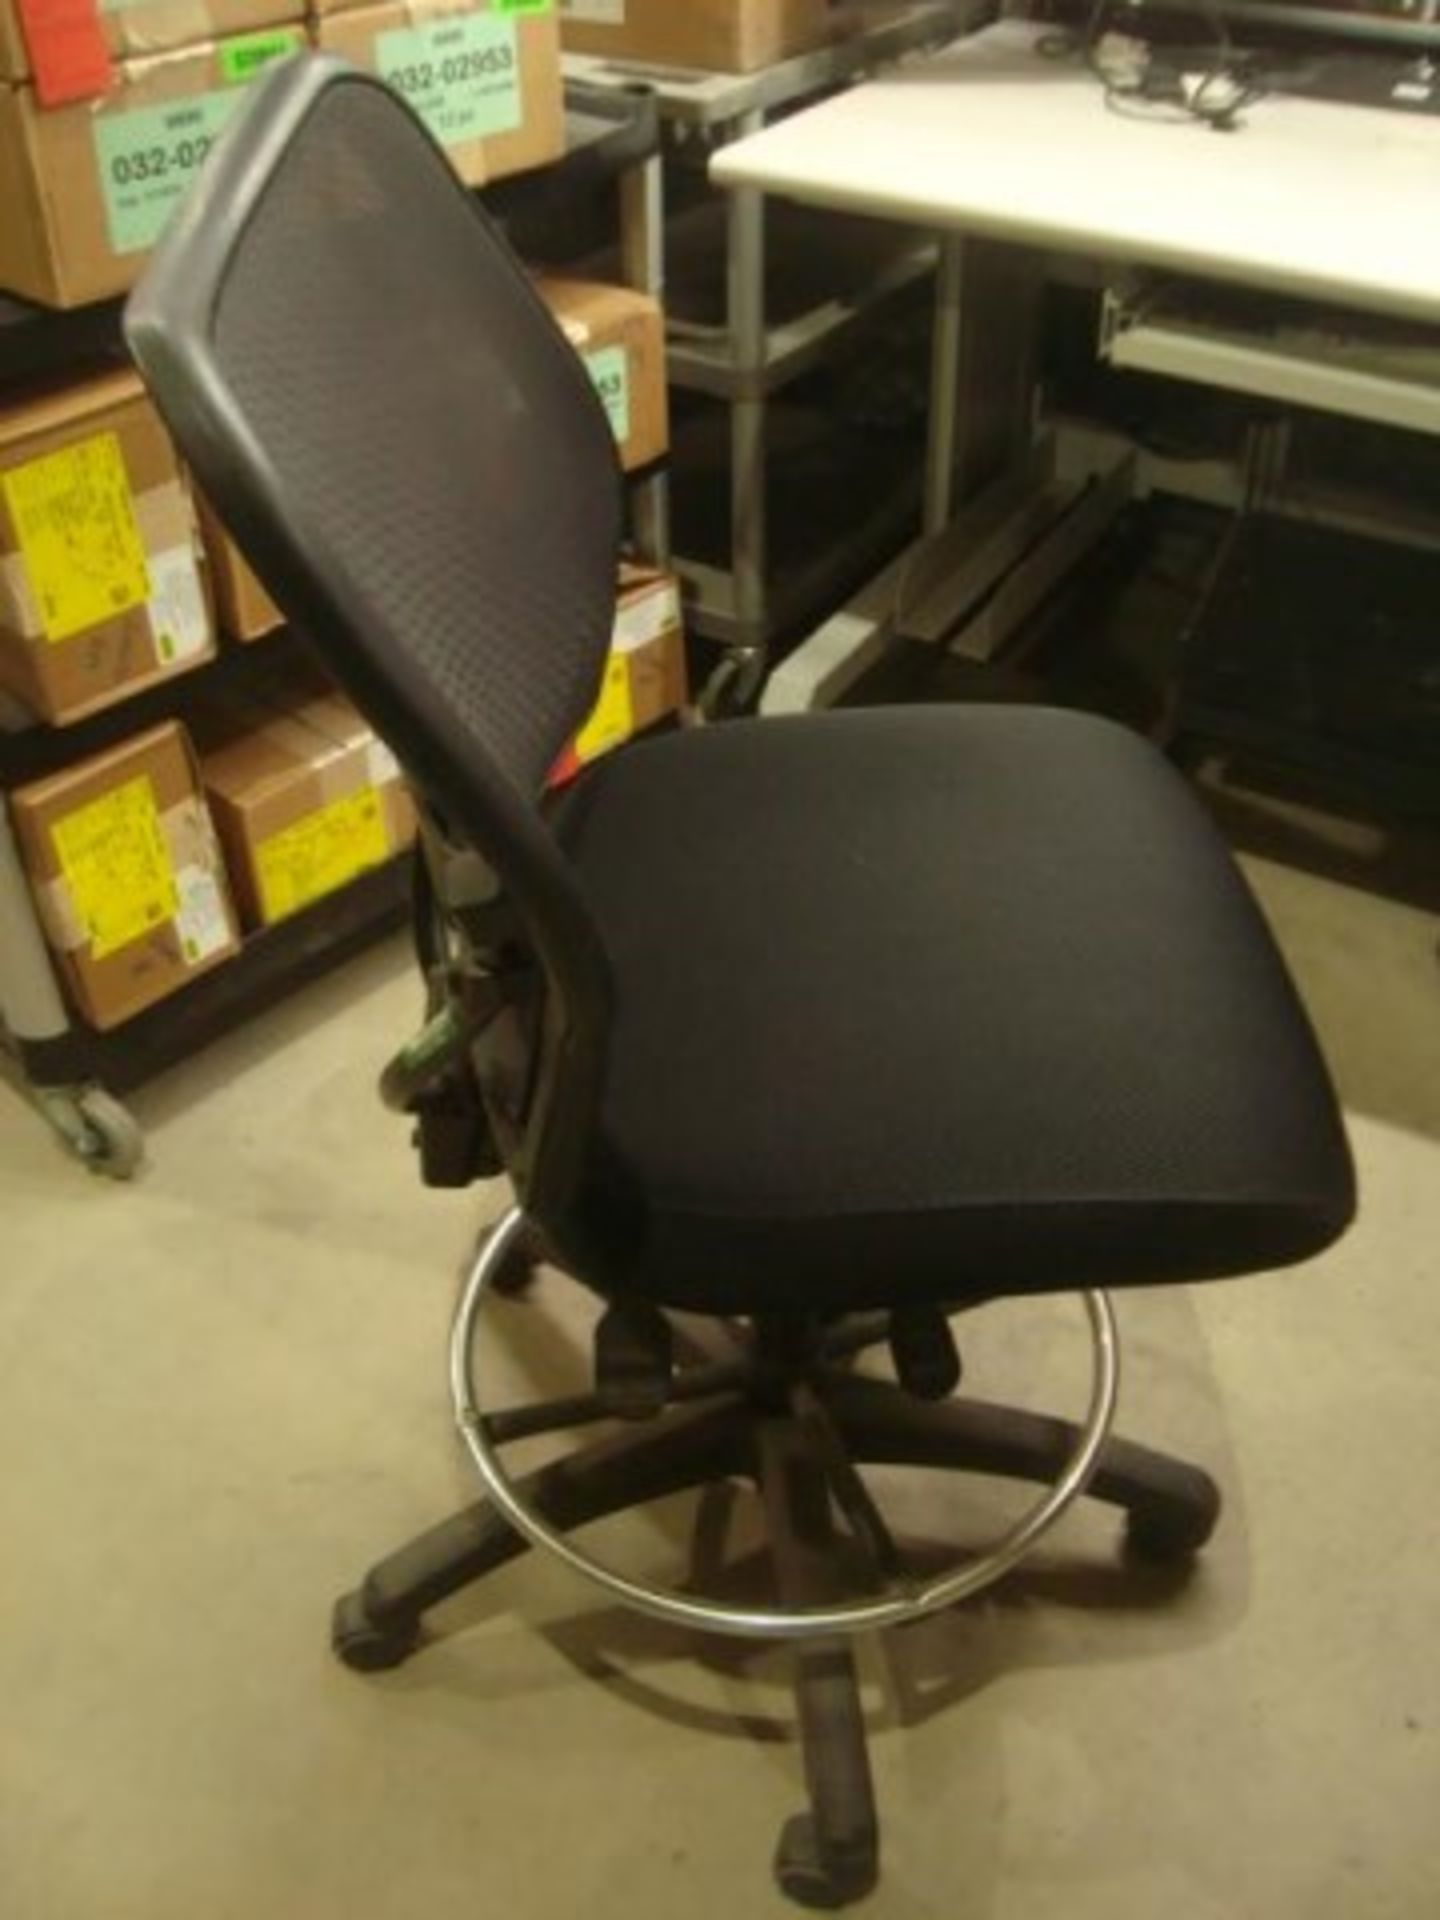 Mobile Workstation Benches & Chairs - Image 12 of 13